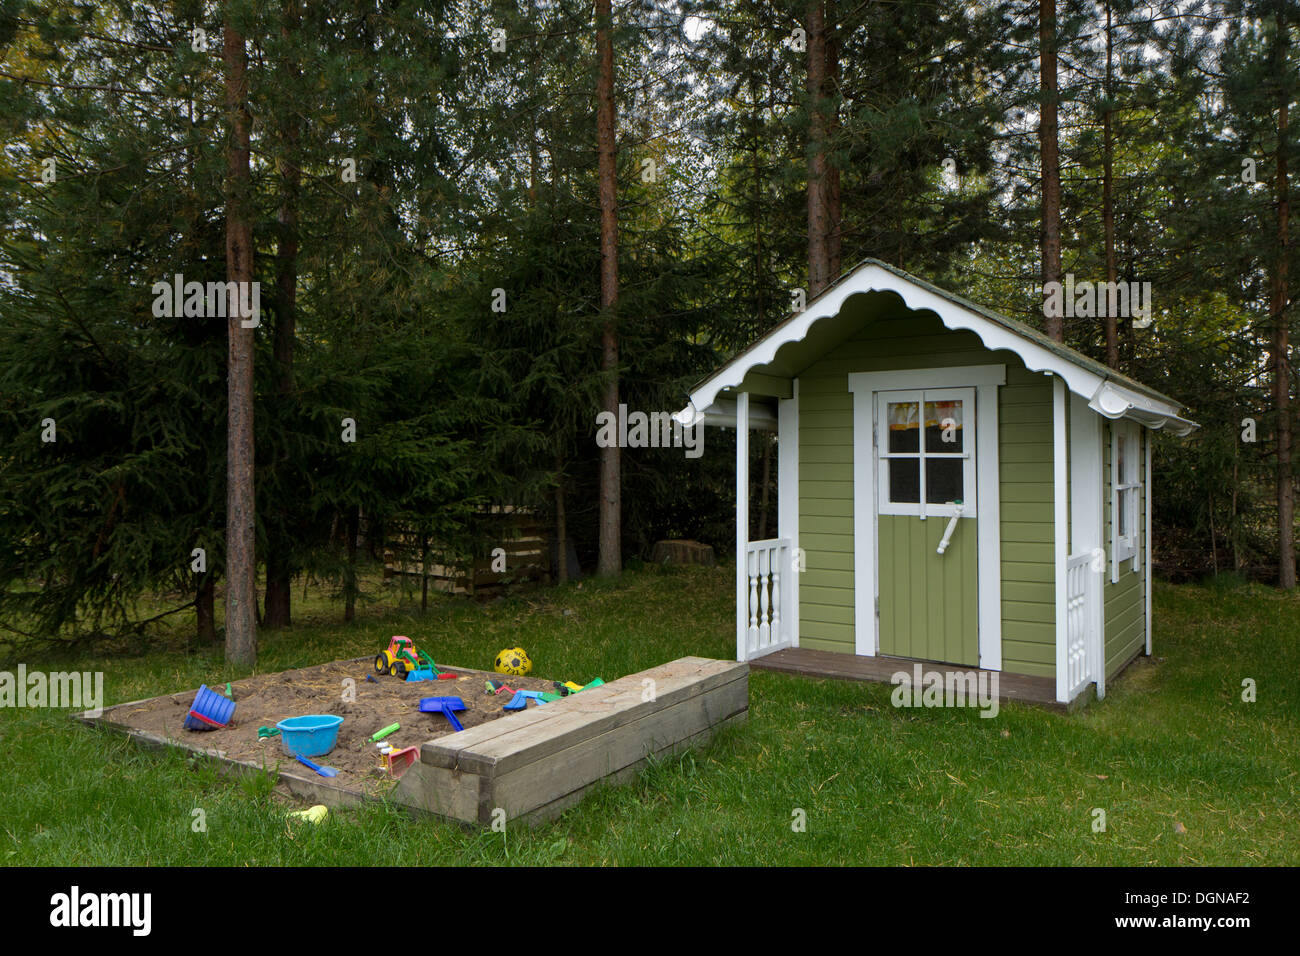 Sandpit and playhouse at desolated backyard in daylight, trees behind them Stock Photo